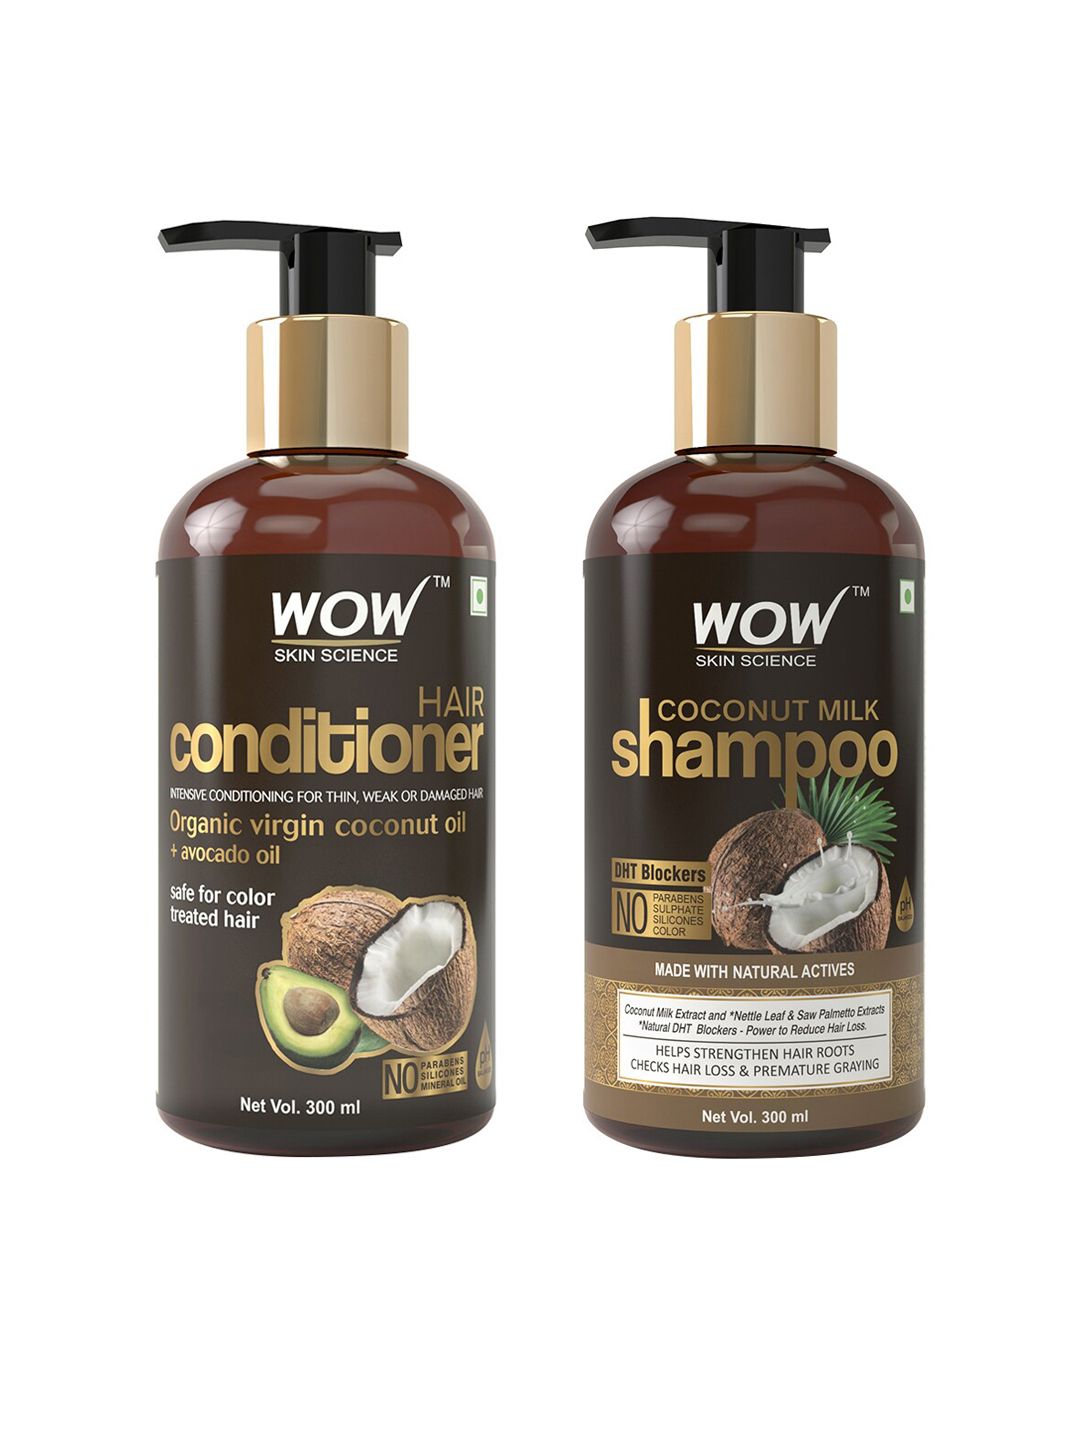 WOW SKIN SCIENCE Set of Shampoo & Conditioner Price in India